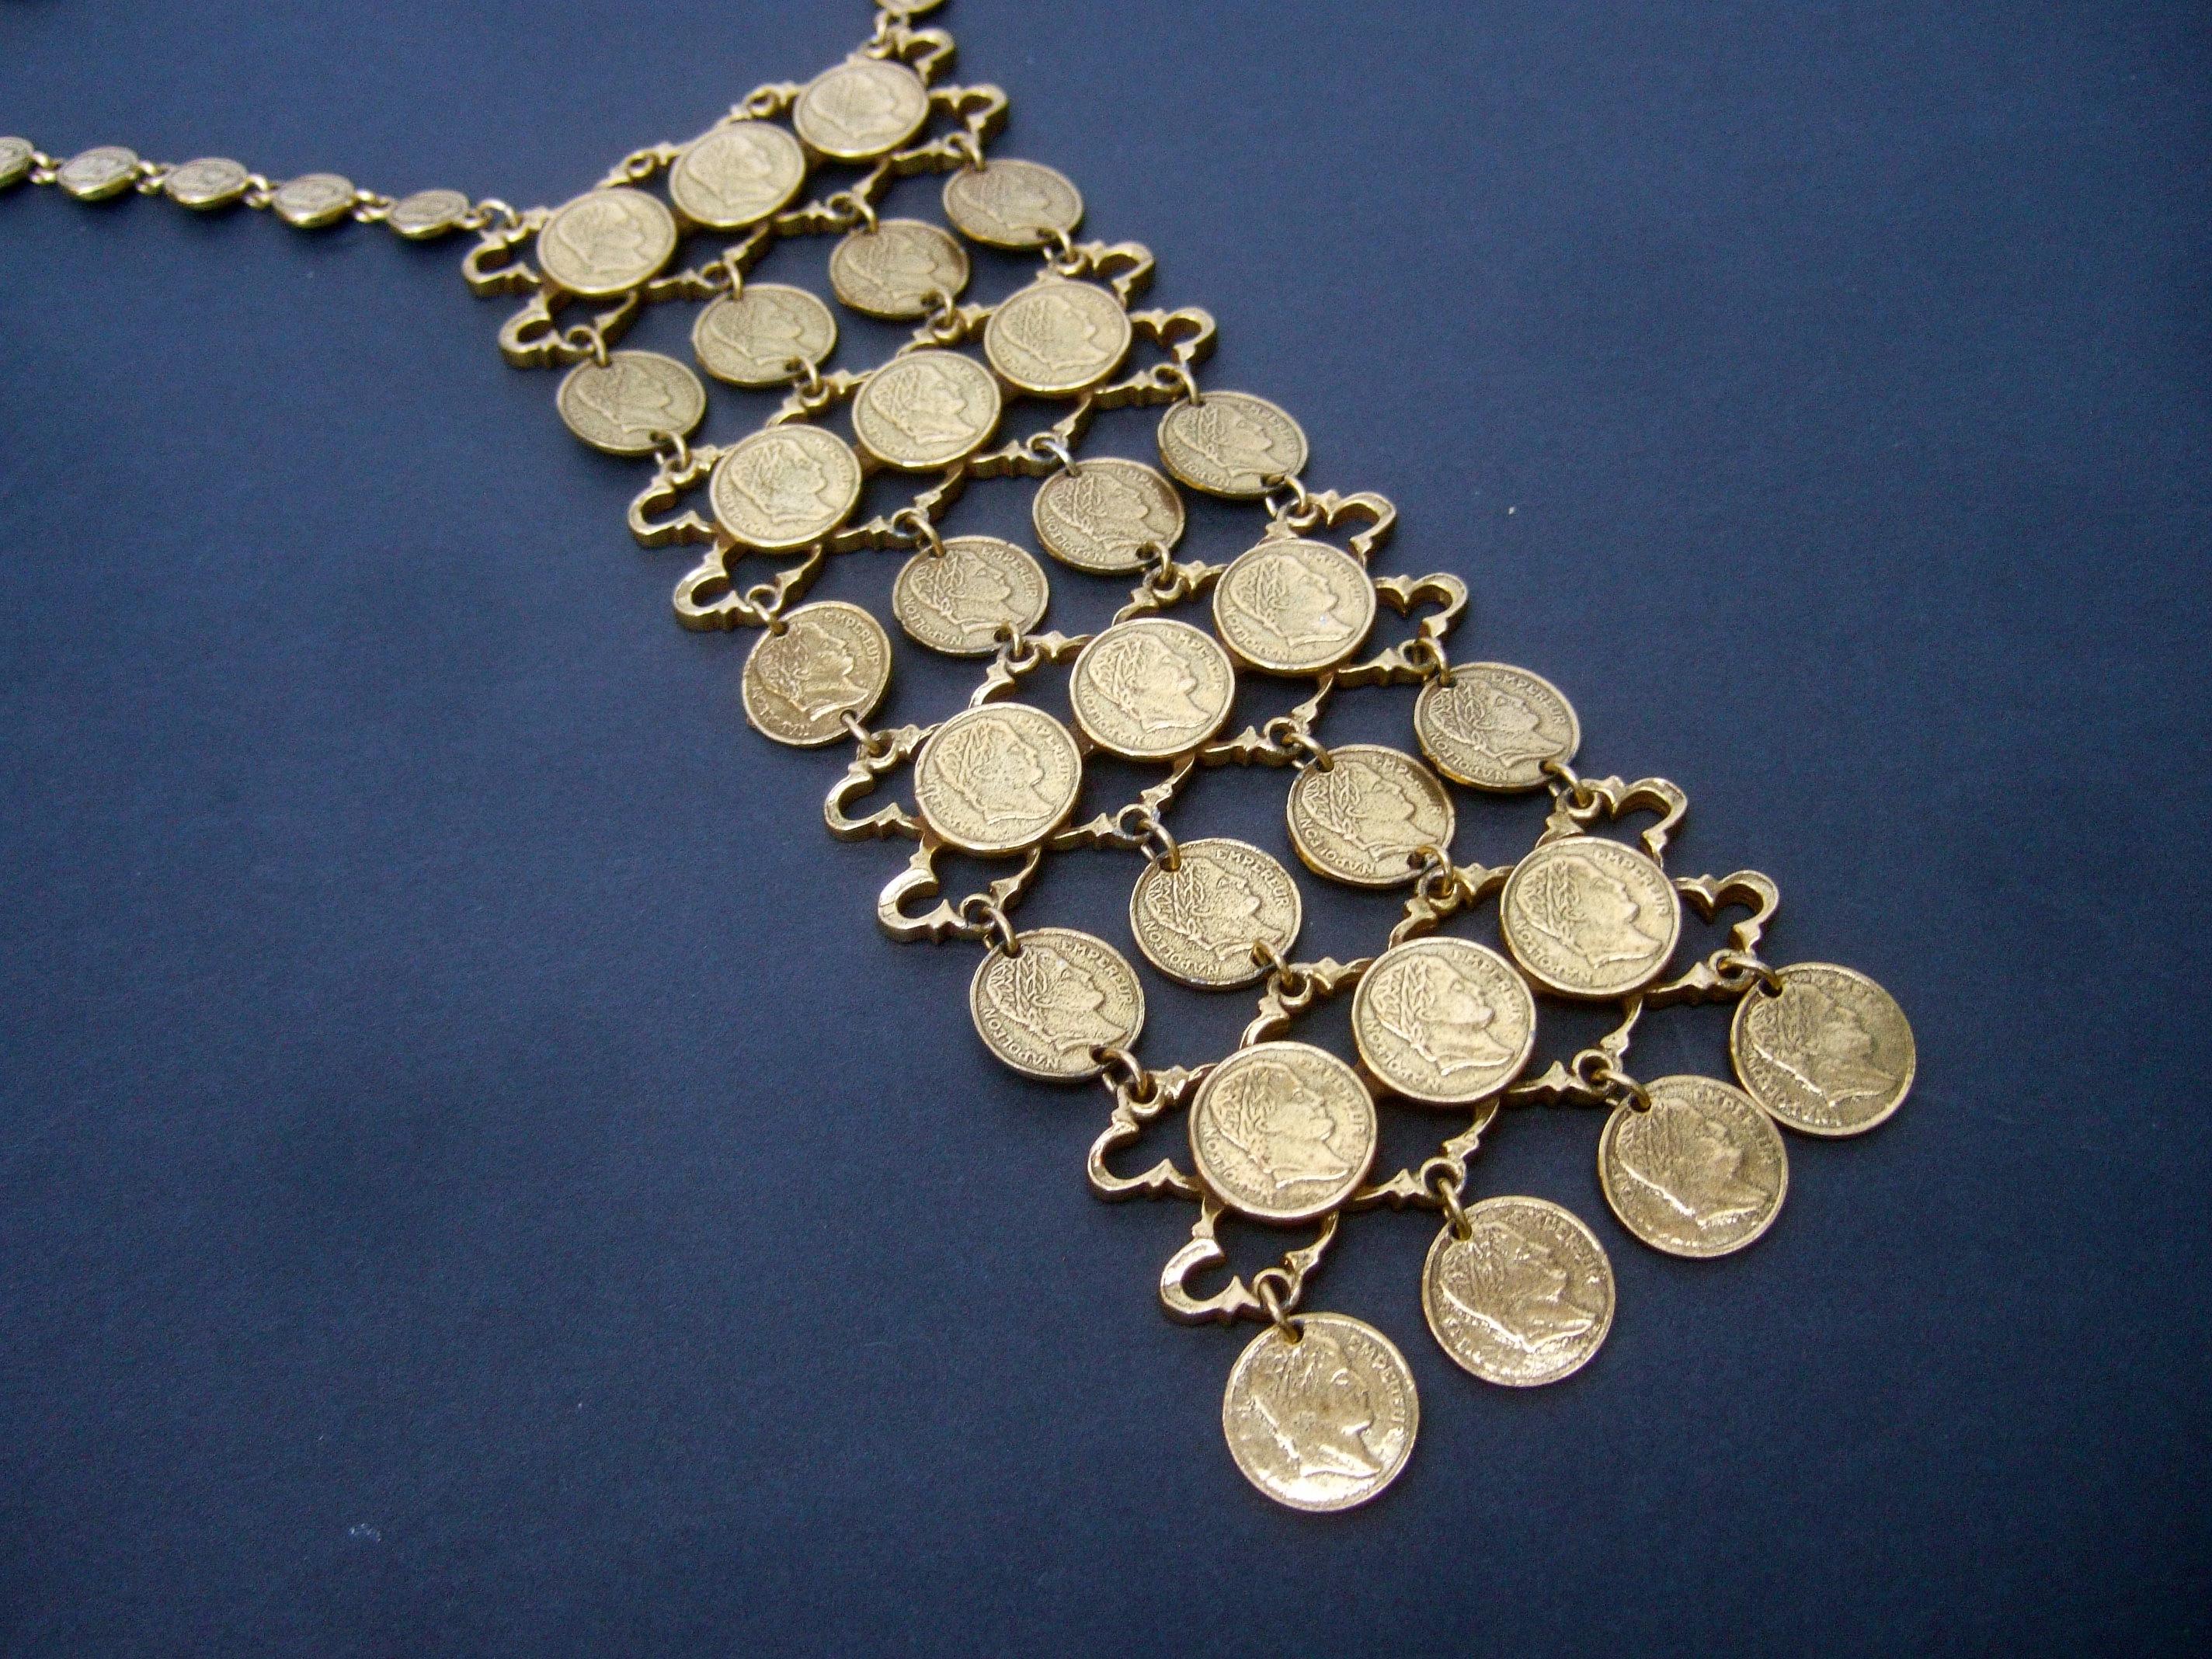 Massive Articulated Gilt Metal Coin Bib Necklace circa 1970s For Sale 4